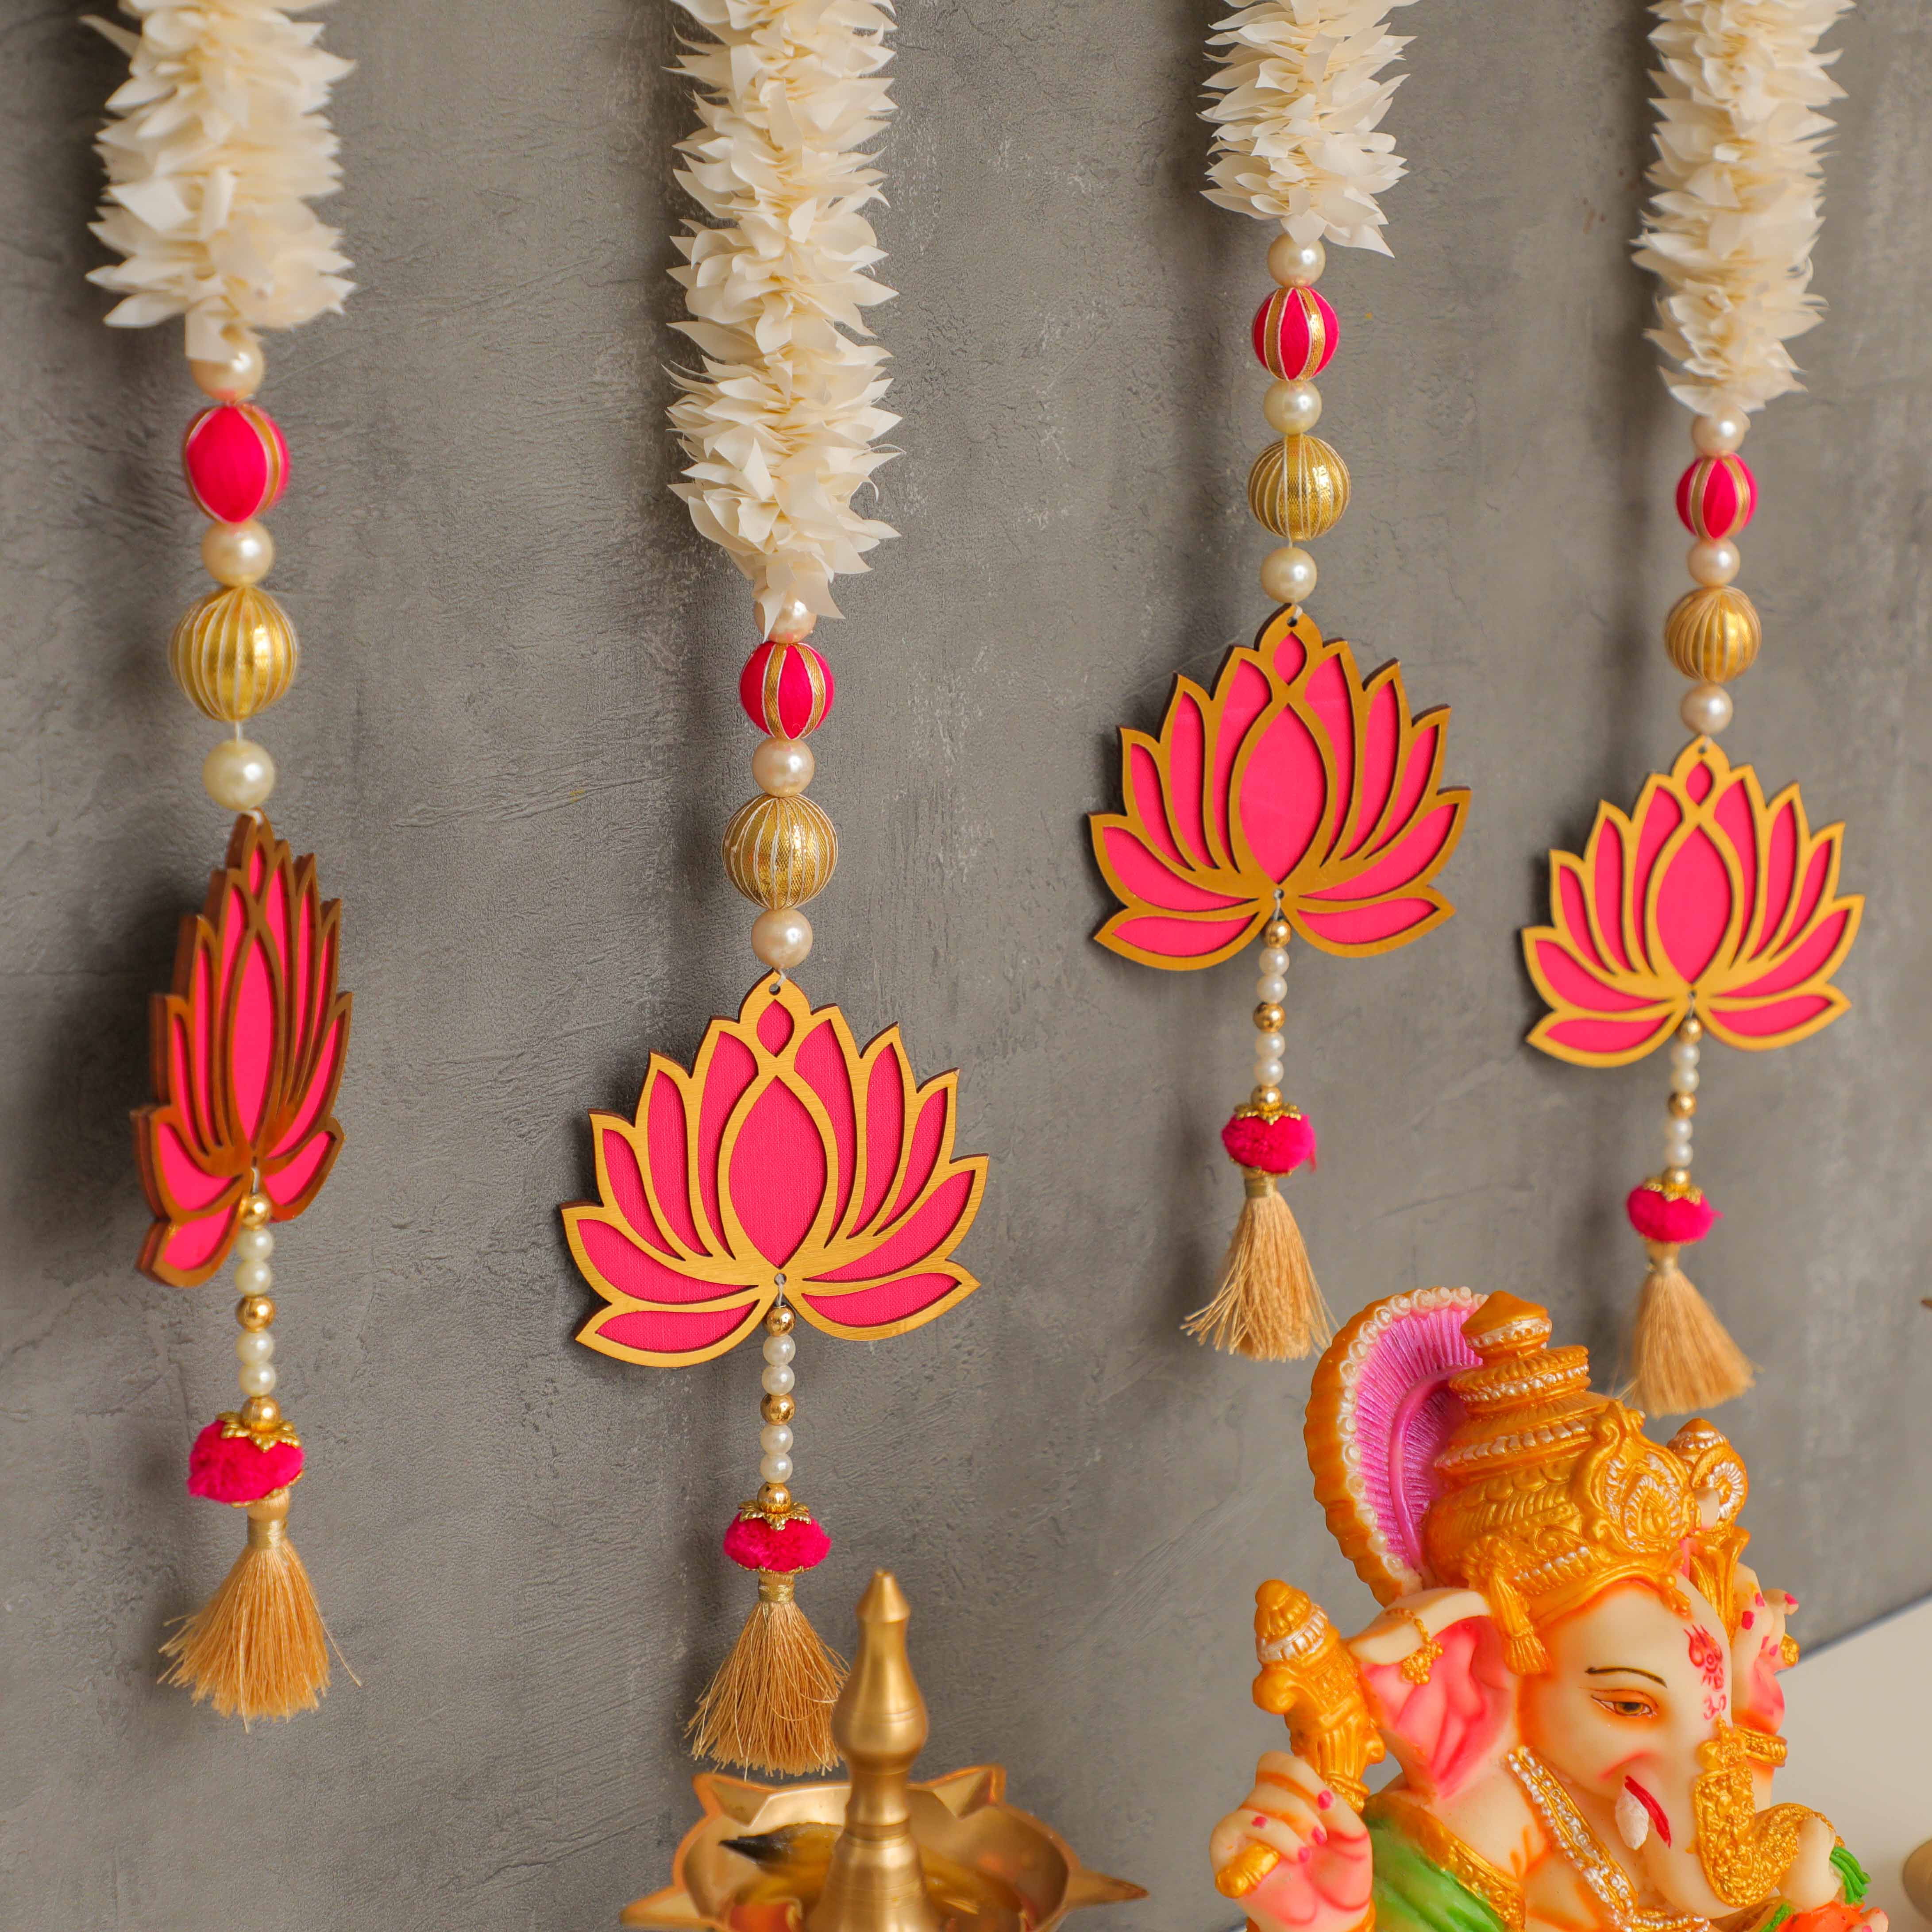 Handcrafted in premium grade material, the traditional lotus cut-outs are surely a festive essential for every occasion.